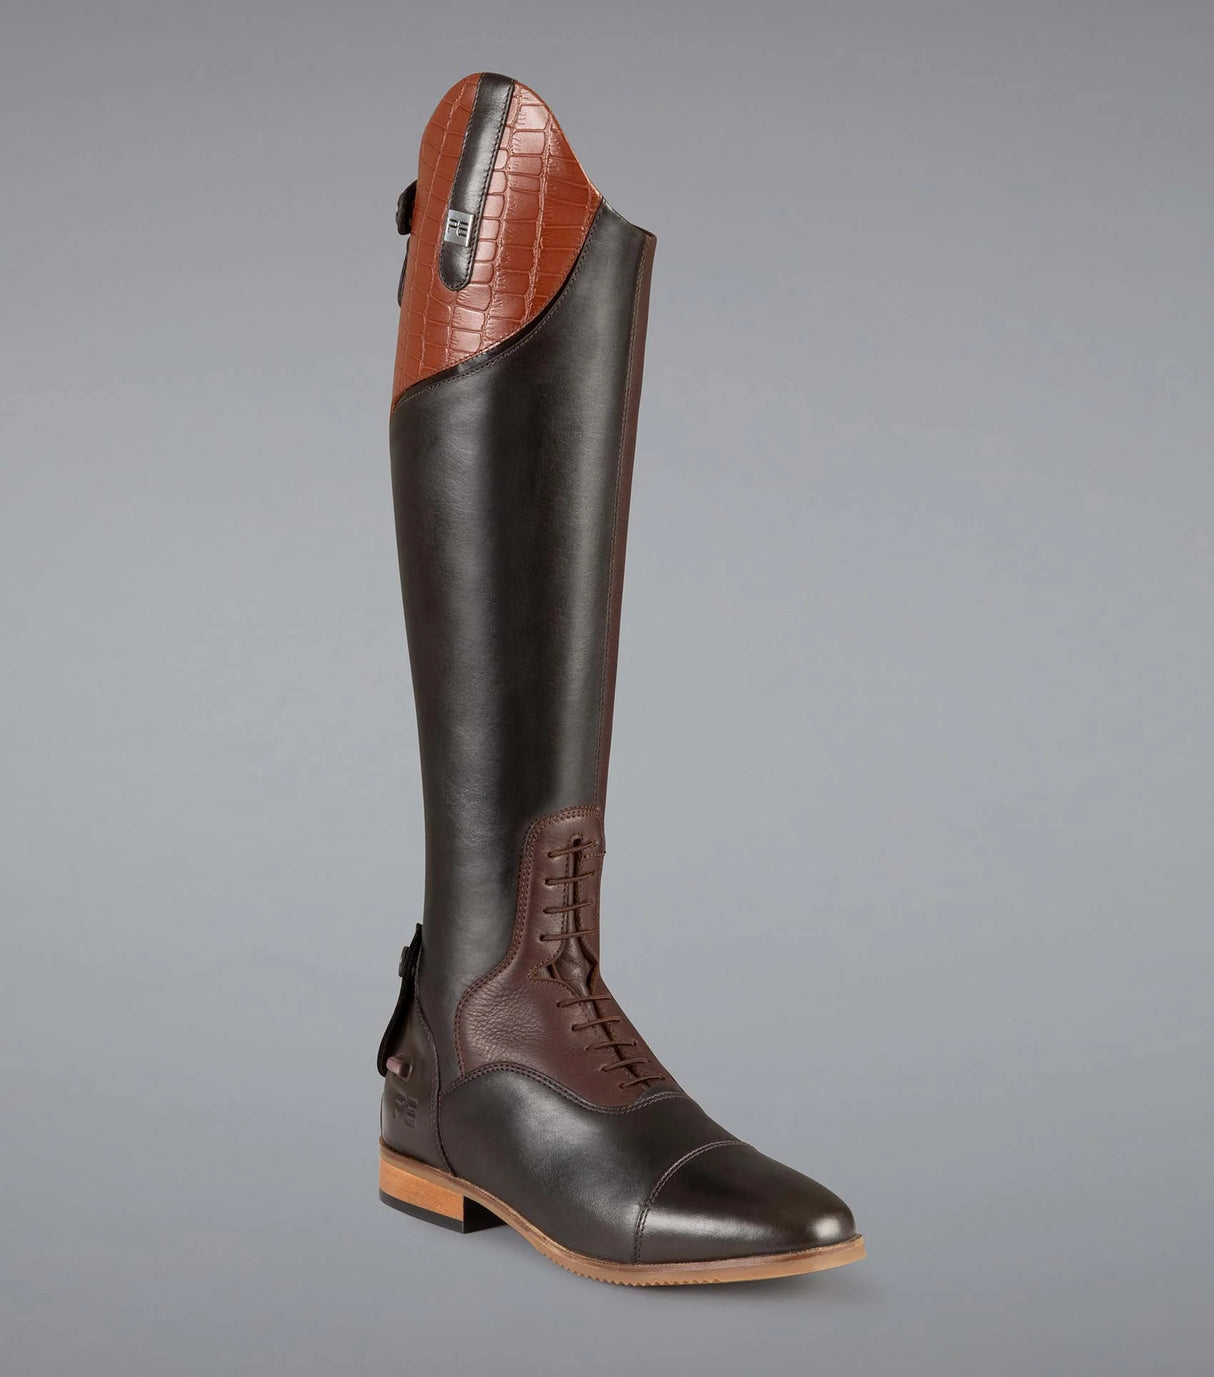 Premier Equine Passaggio Ladies Leather Field Riding Boots Brown